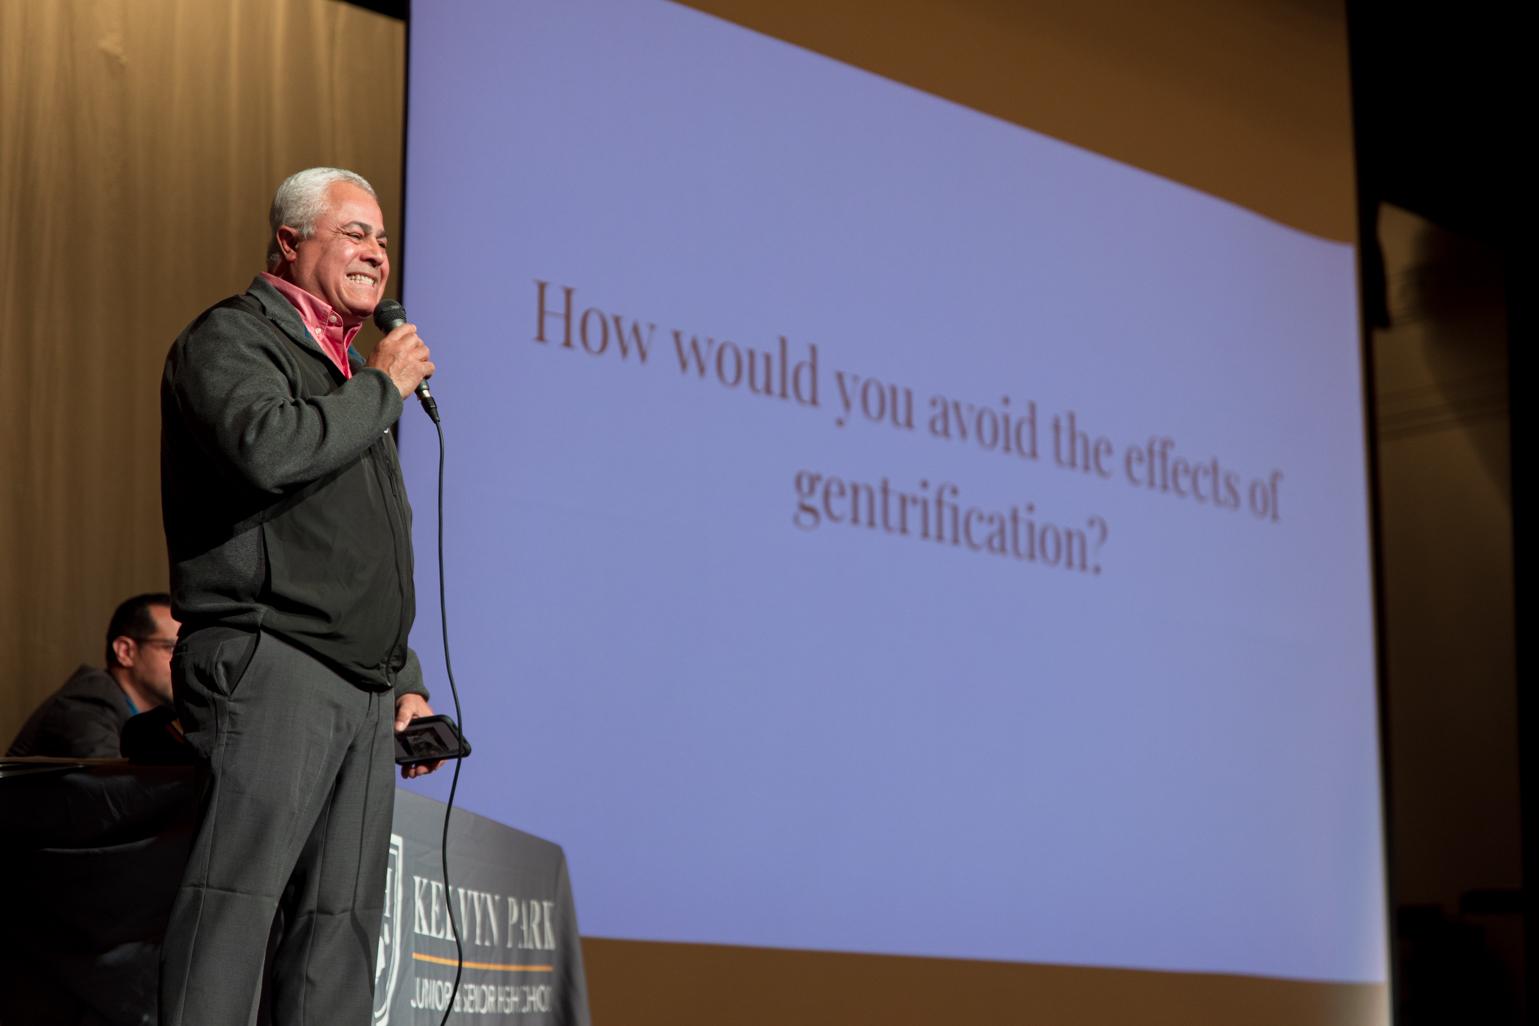 Esteban Burgoa, a City Council candidate for the 31st Ward, addresses a question on how he will avoid the effects of gentrification if elected during a Chicago Votes forum at Kelvyn Park High School on Feb. 21, 2023. (Michael Izquierdo / WTTW News)